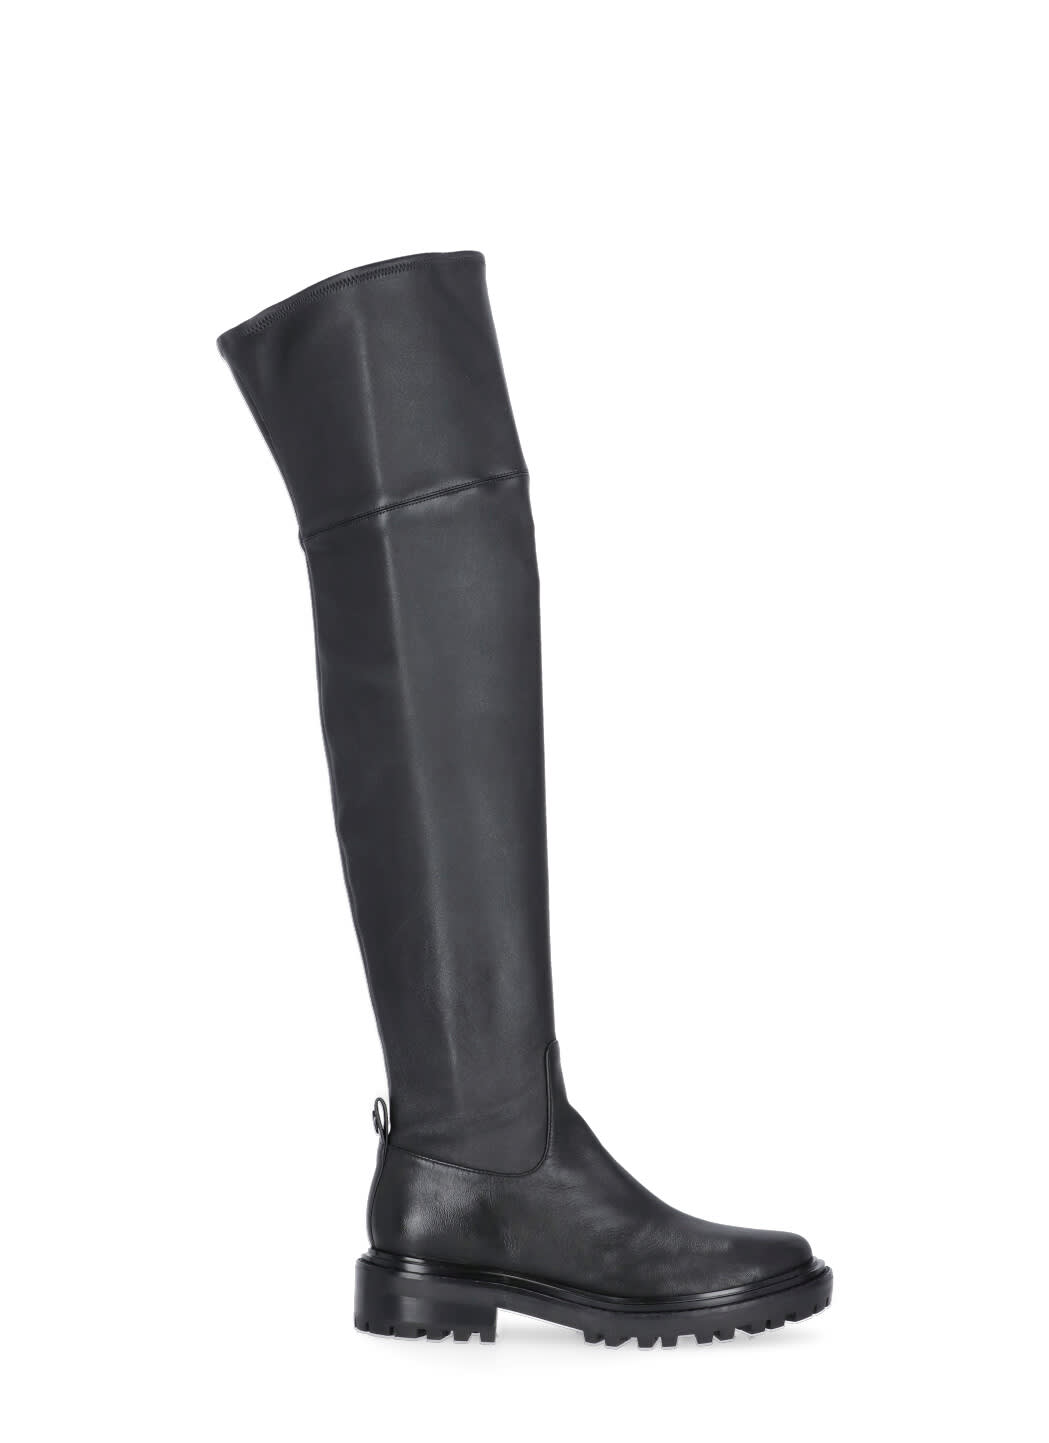 Tory Burch Utility Over The Knee Leather Boots